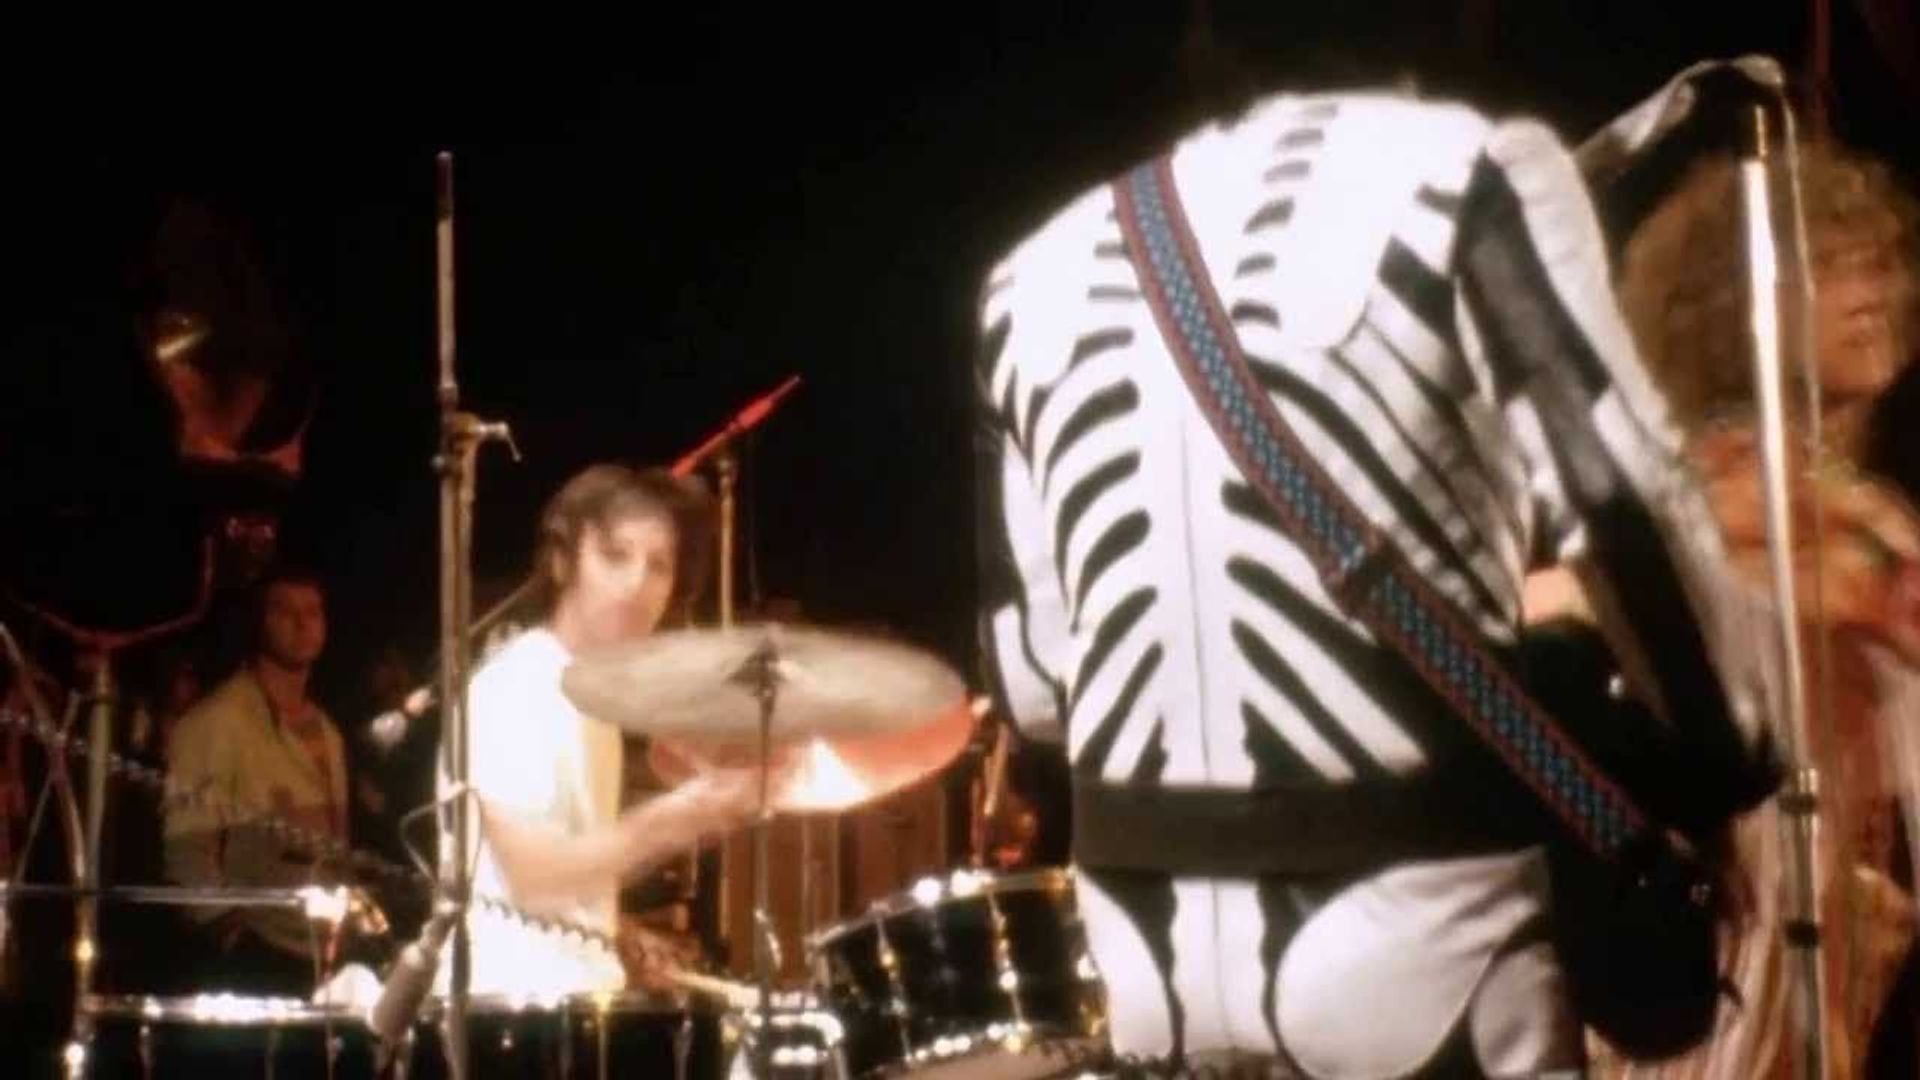 Listening to You: The Who at the Isle of Wight 1970 background